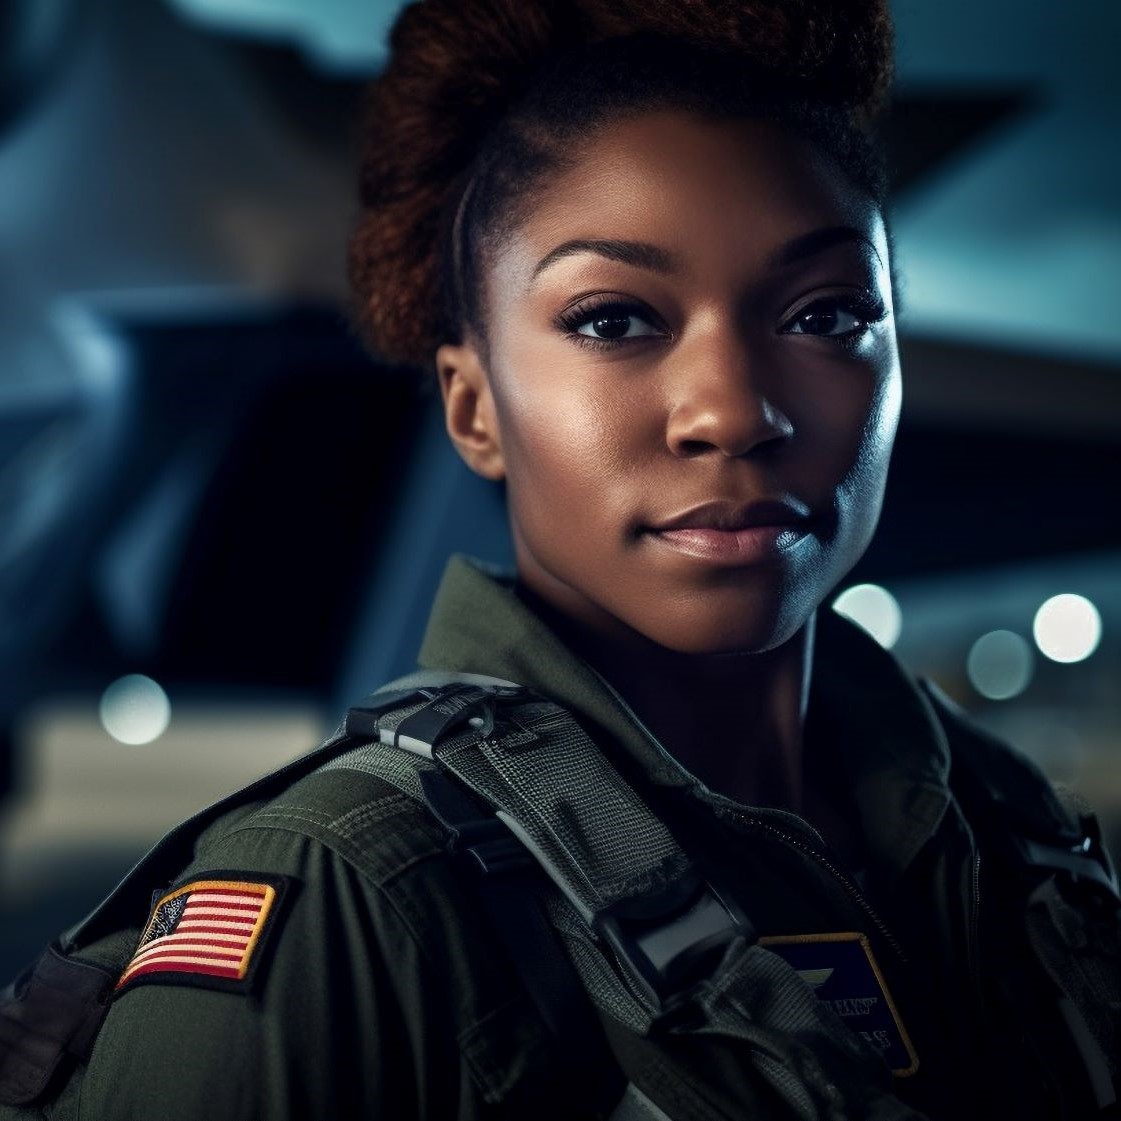 A young women wearing a dark green military jacket with the American flag on the shoulder looks calmly into the camera. Behind her, just out of focus, is the front of a fighter jet.